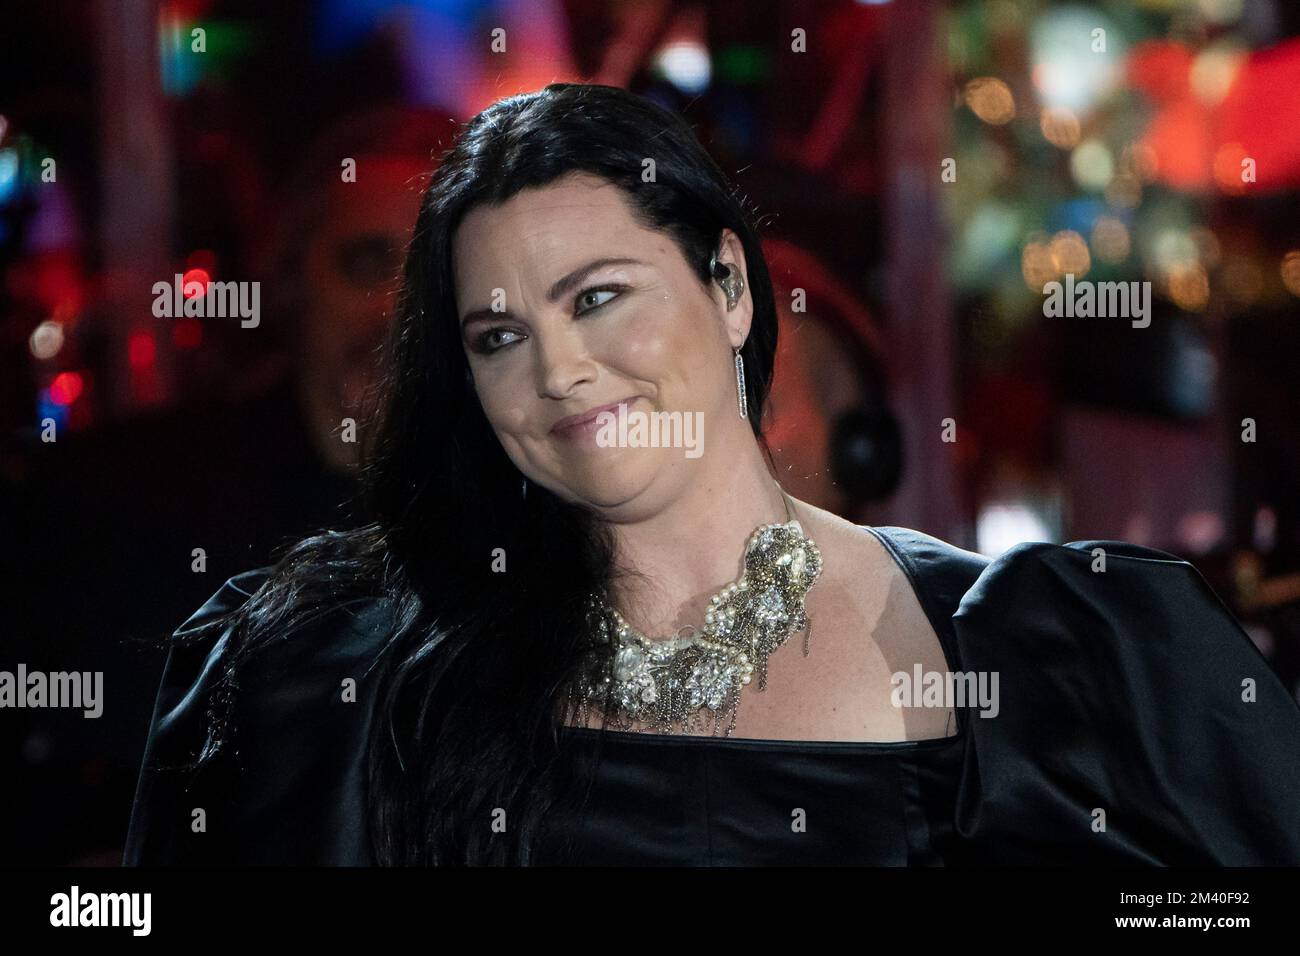 Rome, Italy, December 17, 2022 - Amy Lee, singer and voice of the group  "Evanescence", attends at the concert "Concerto per la Pace - XXX Concerto  di Natale" in Auditorium Conciliazione in